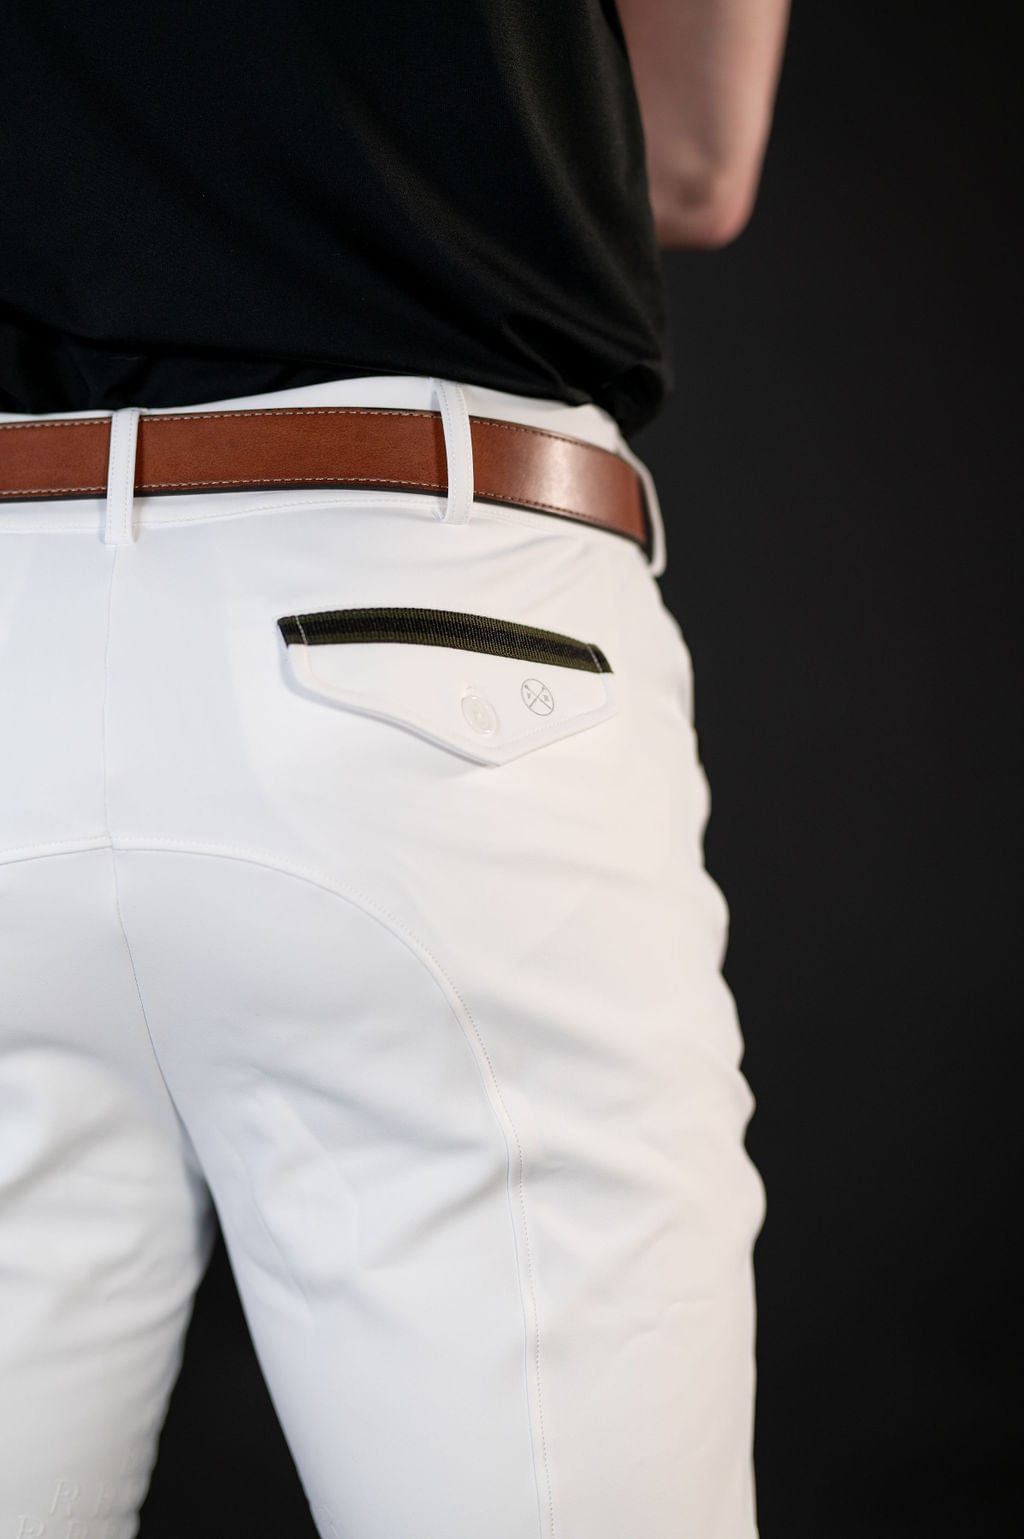 Men's PRO Knee Patch Breech in White (size 30-36 available)